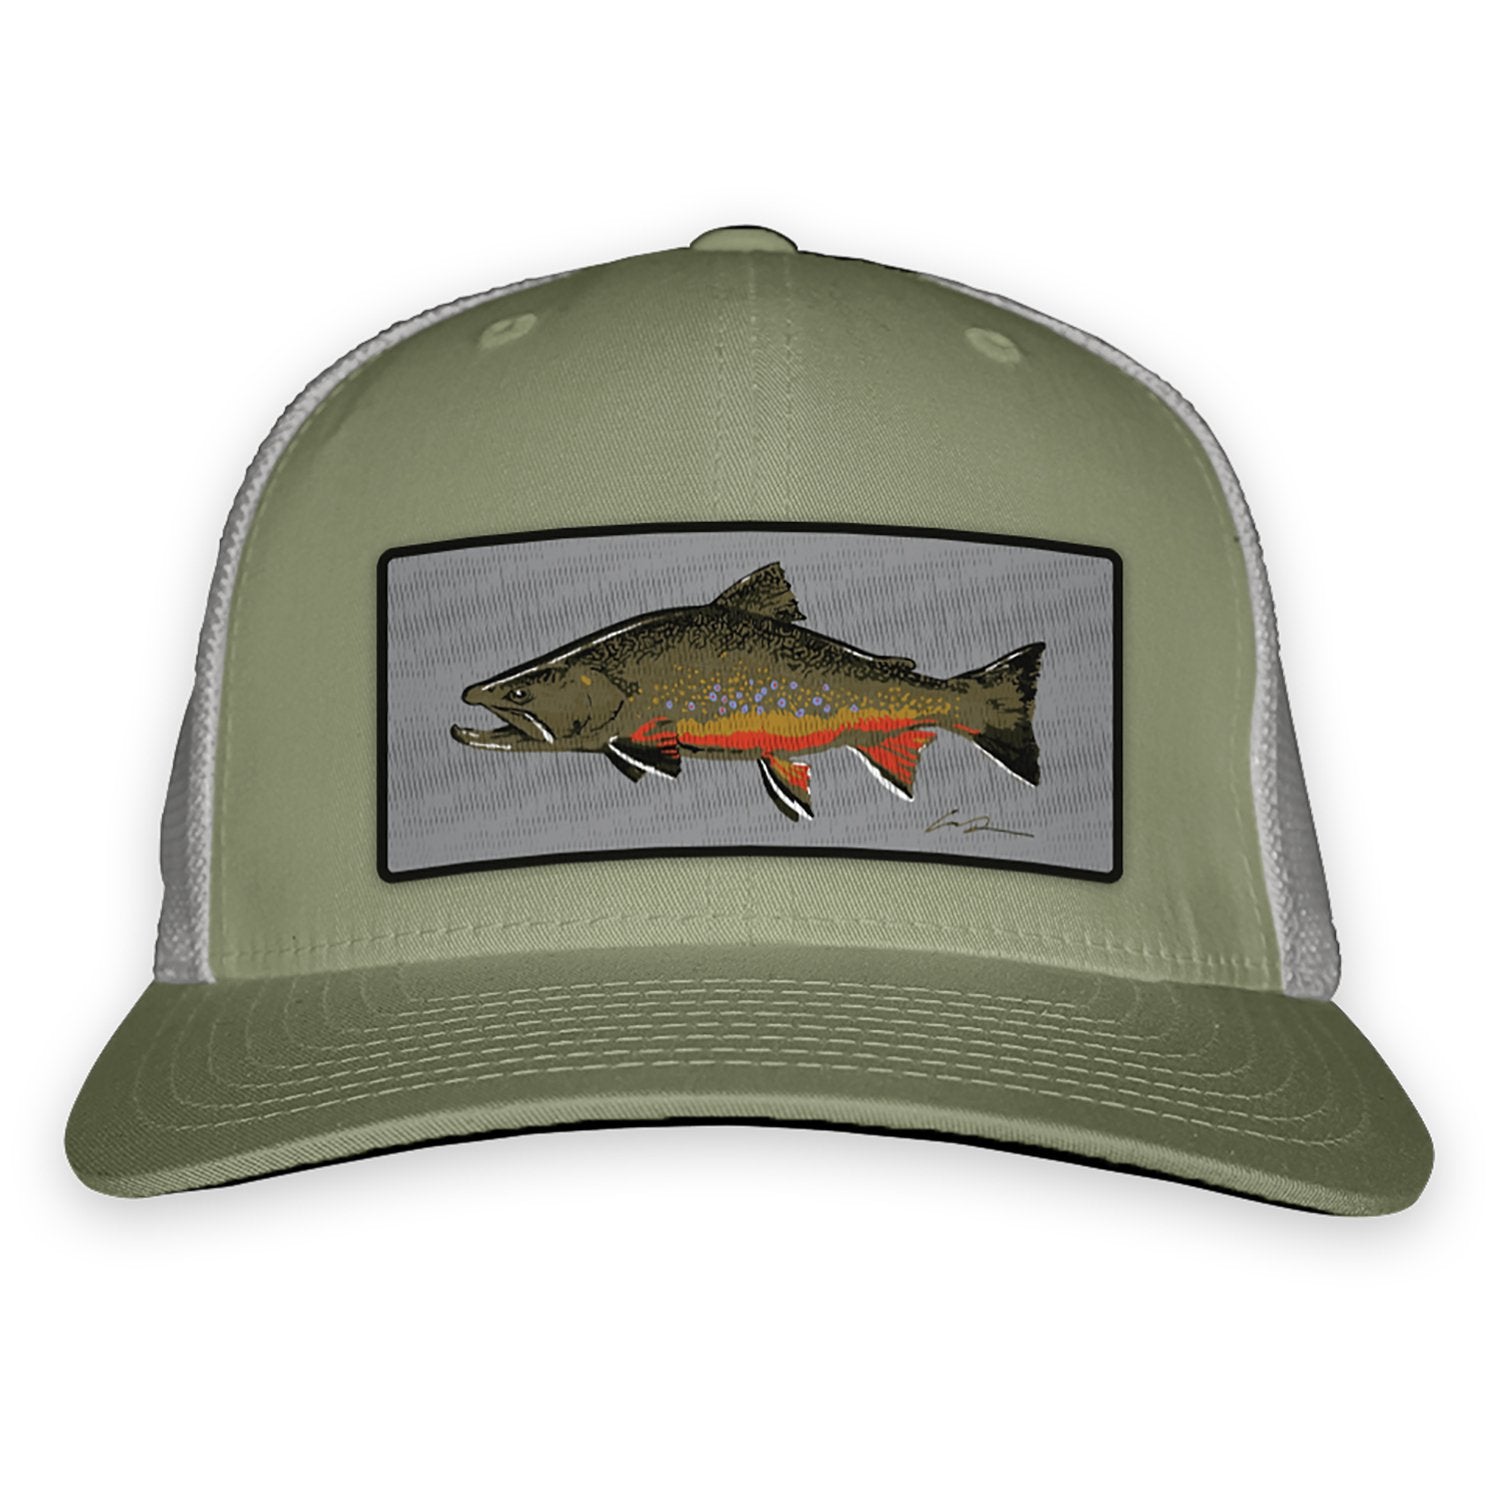 Hats & Sungaiters Page 3 - Motor City Anglers